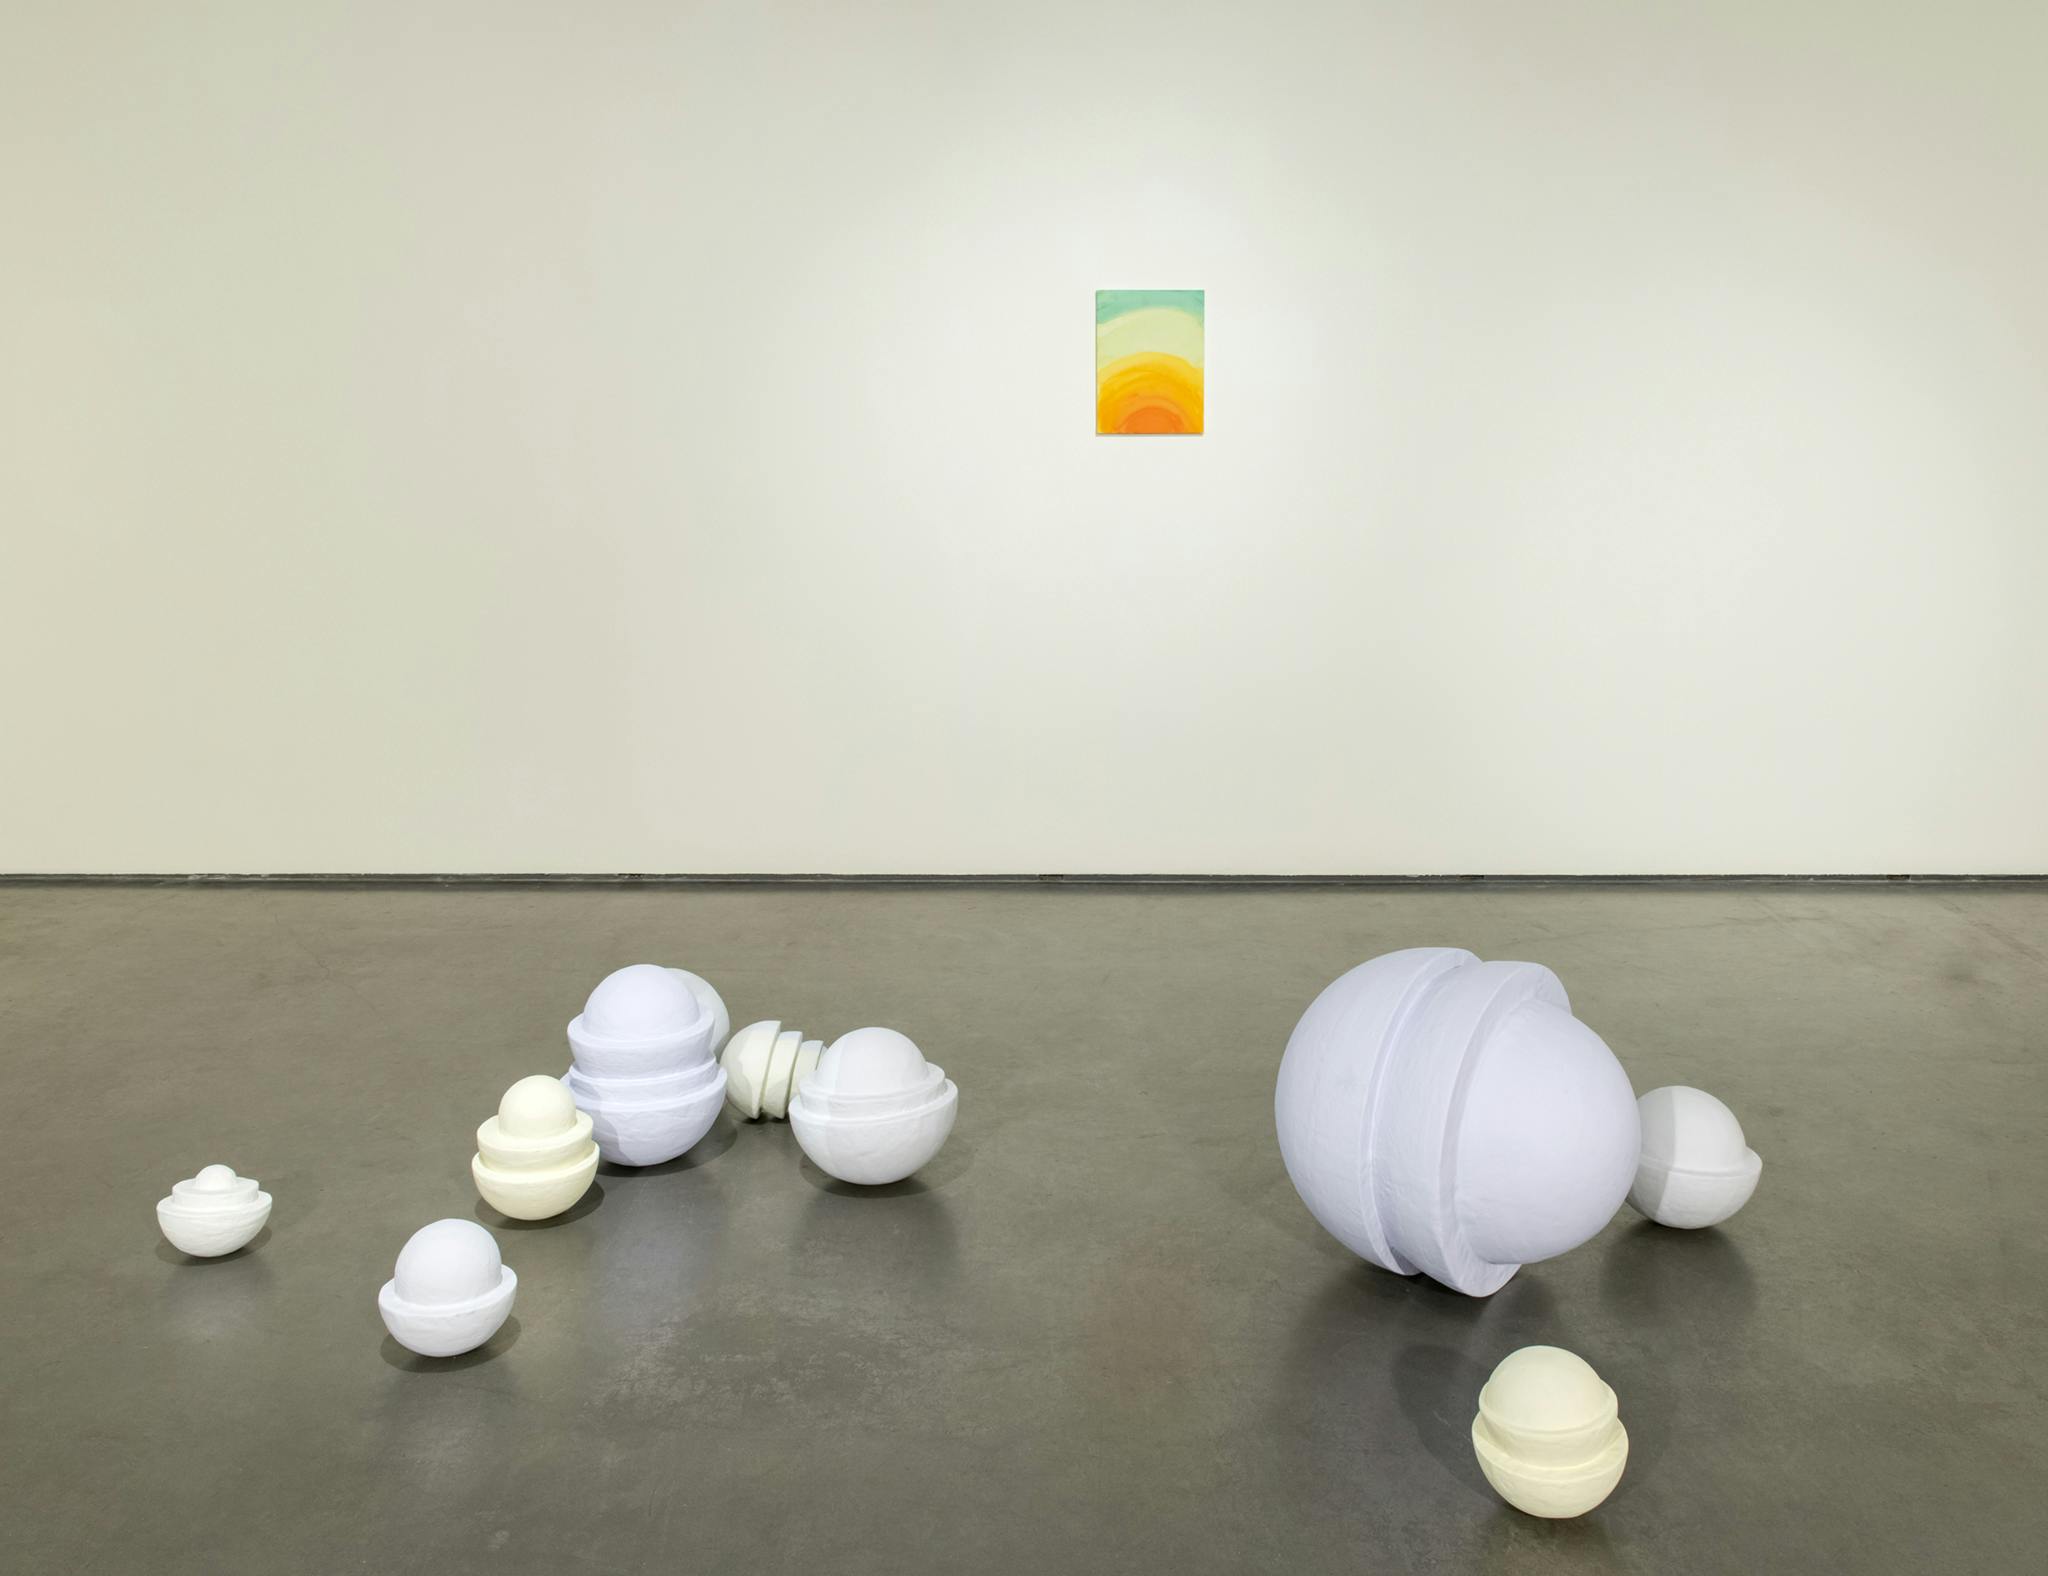 Nine ceramic sculptures installed on a galley floor. Each sculpture resembles stacked ceramic bowls with a sphere in the middle, painted in either a pale yellow, white, or blue.